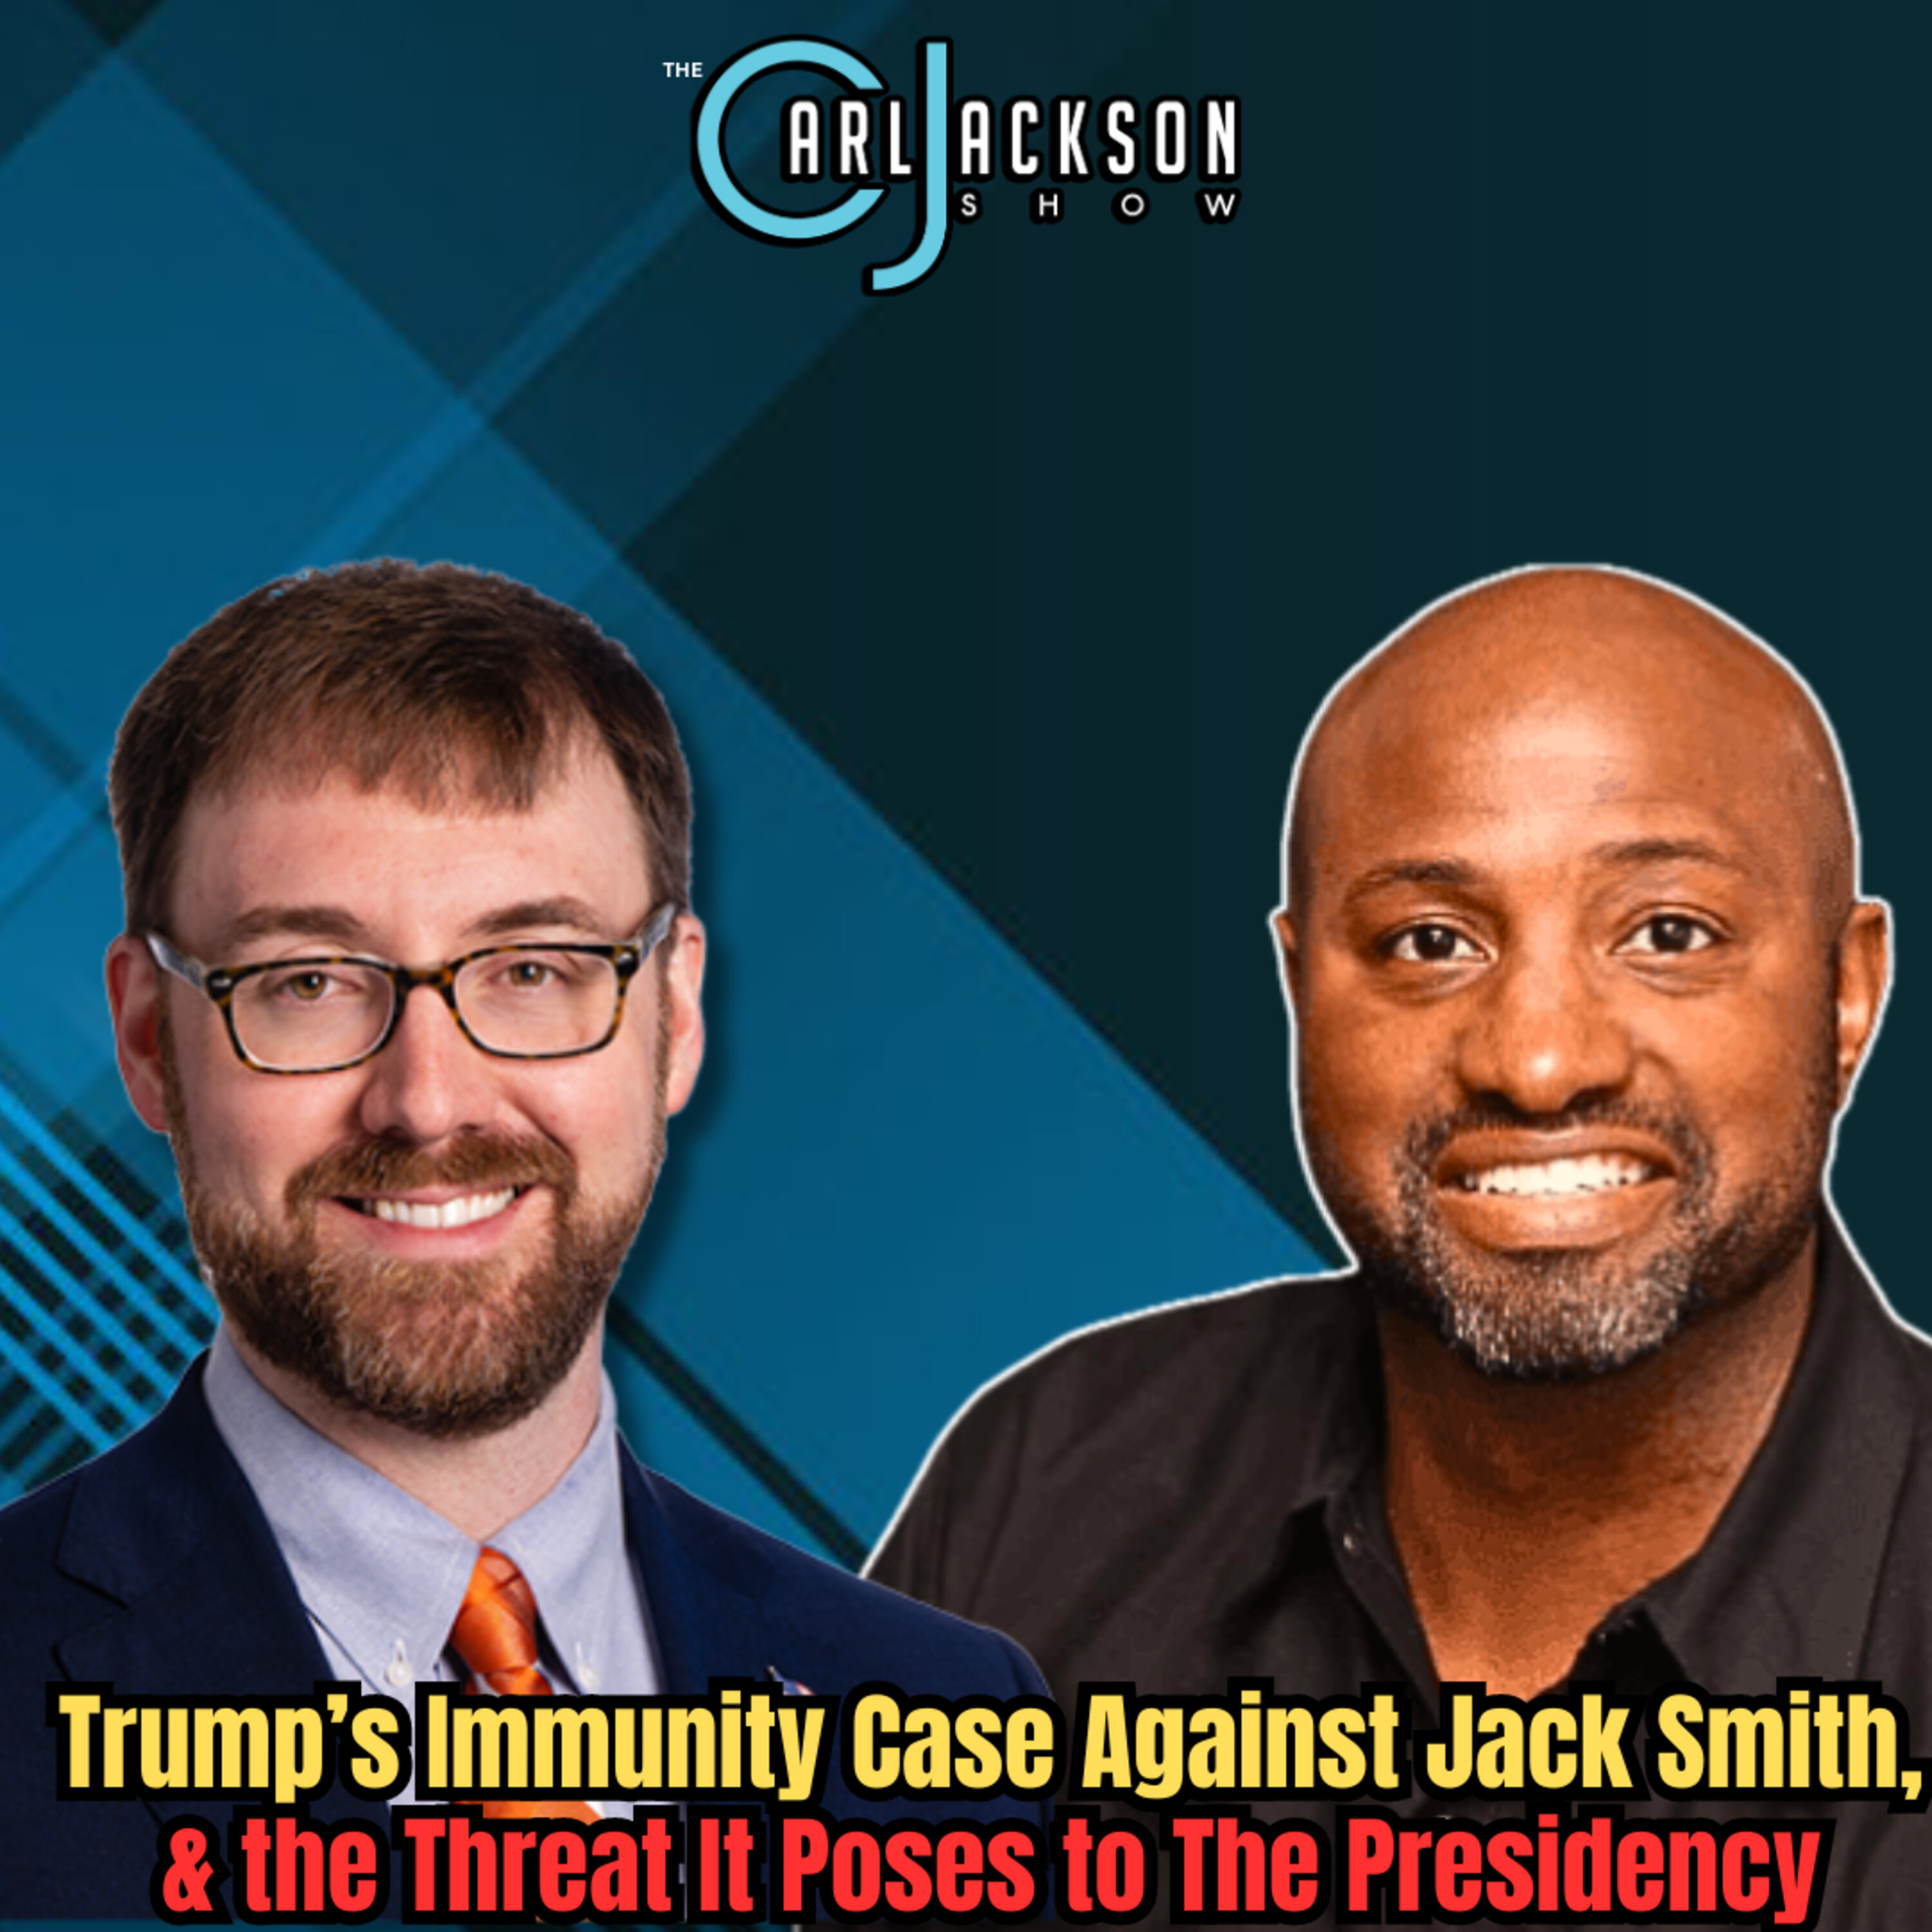 Trump’s Immunity Case Against Jack Smith, & the Threat It Poses to The Presidency